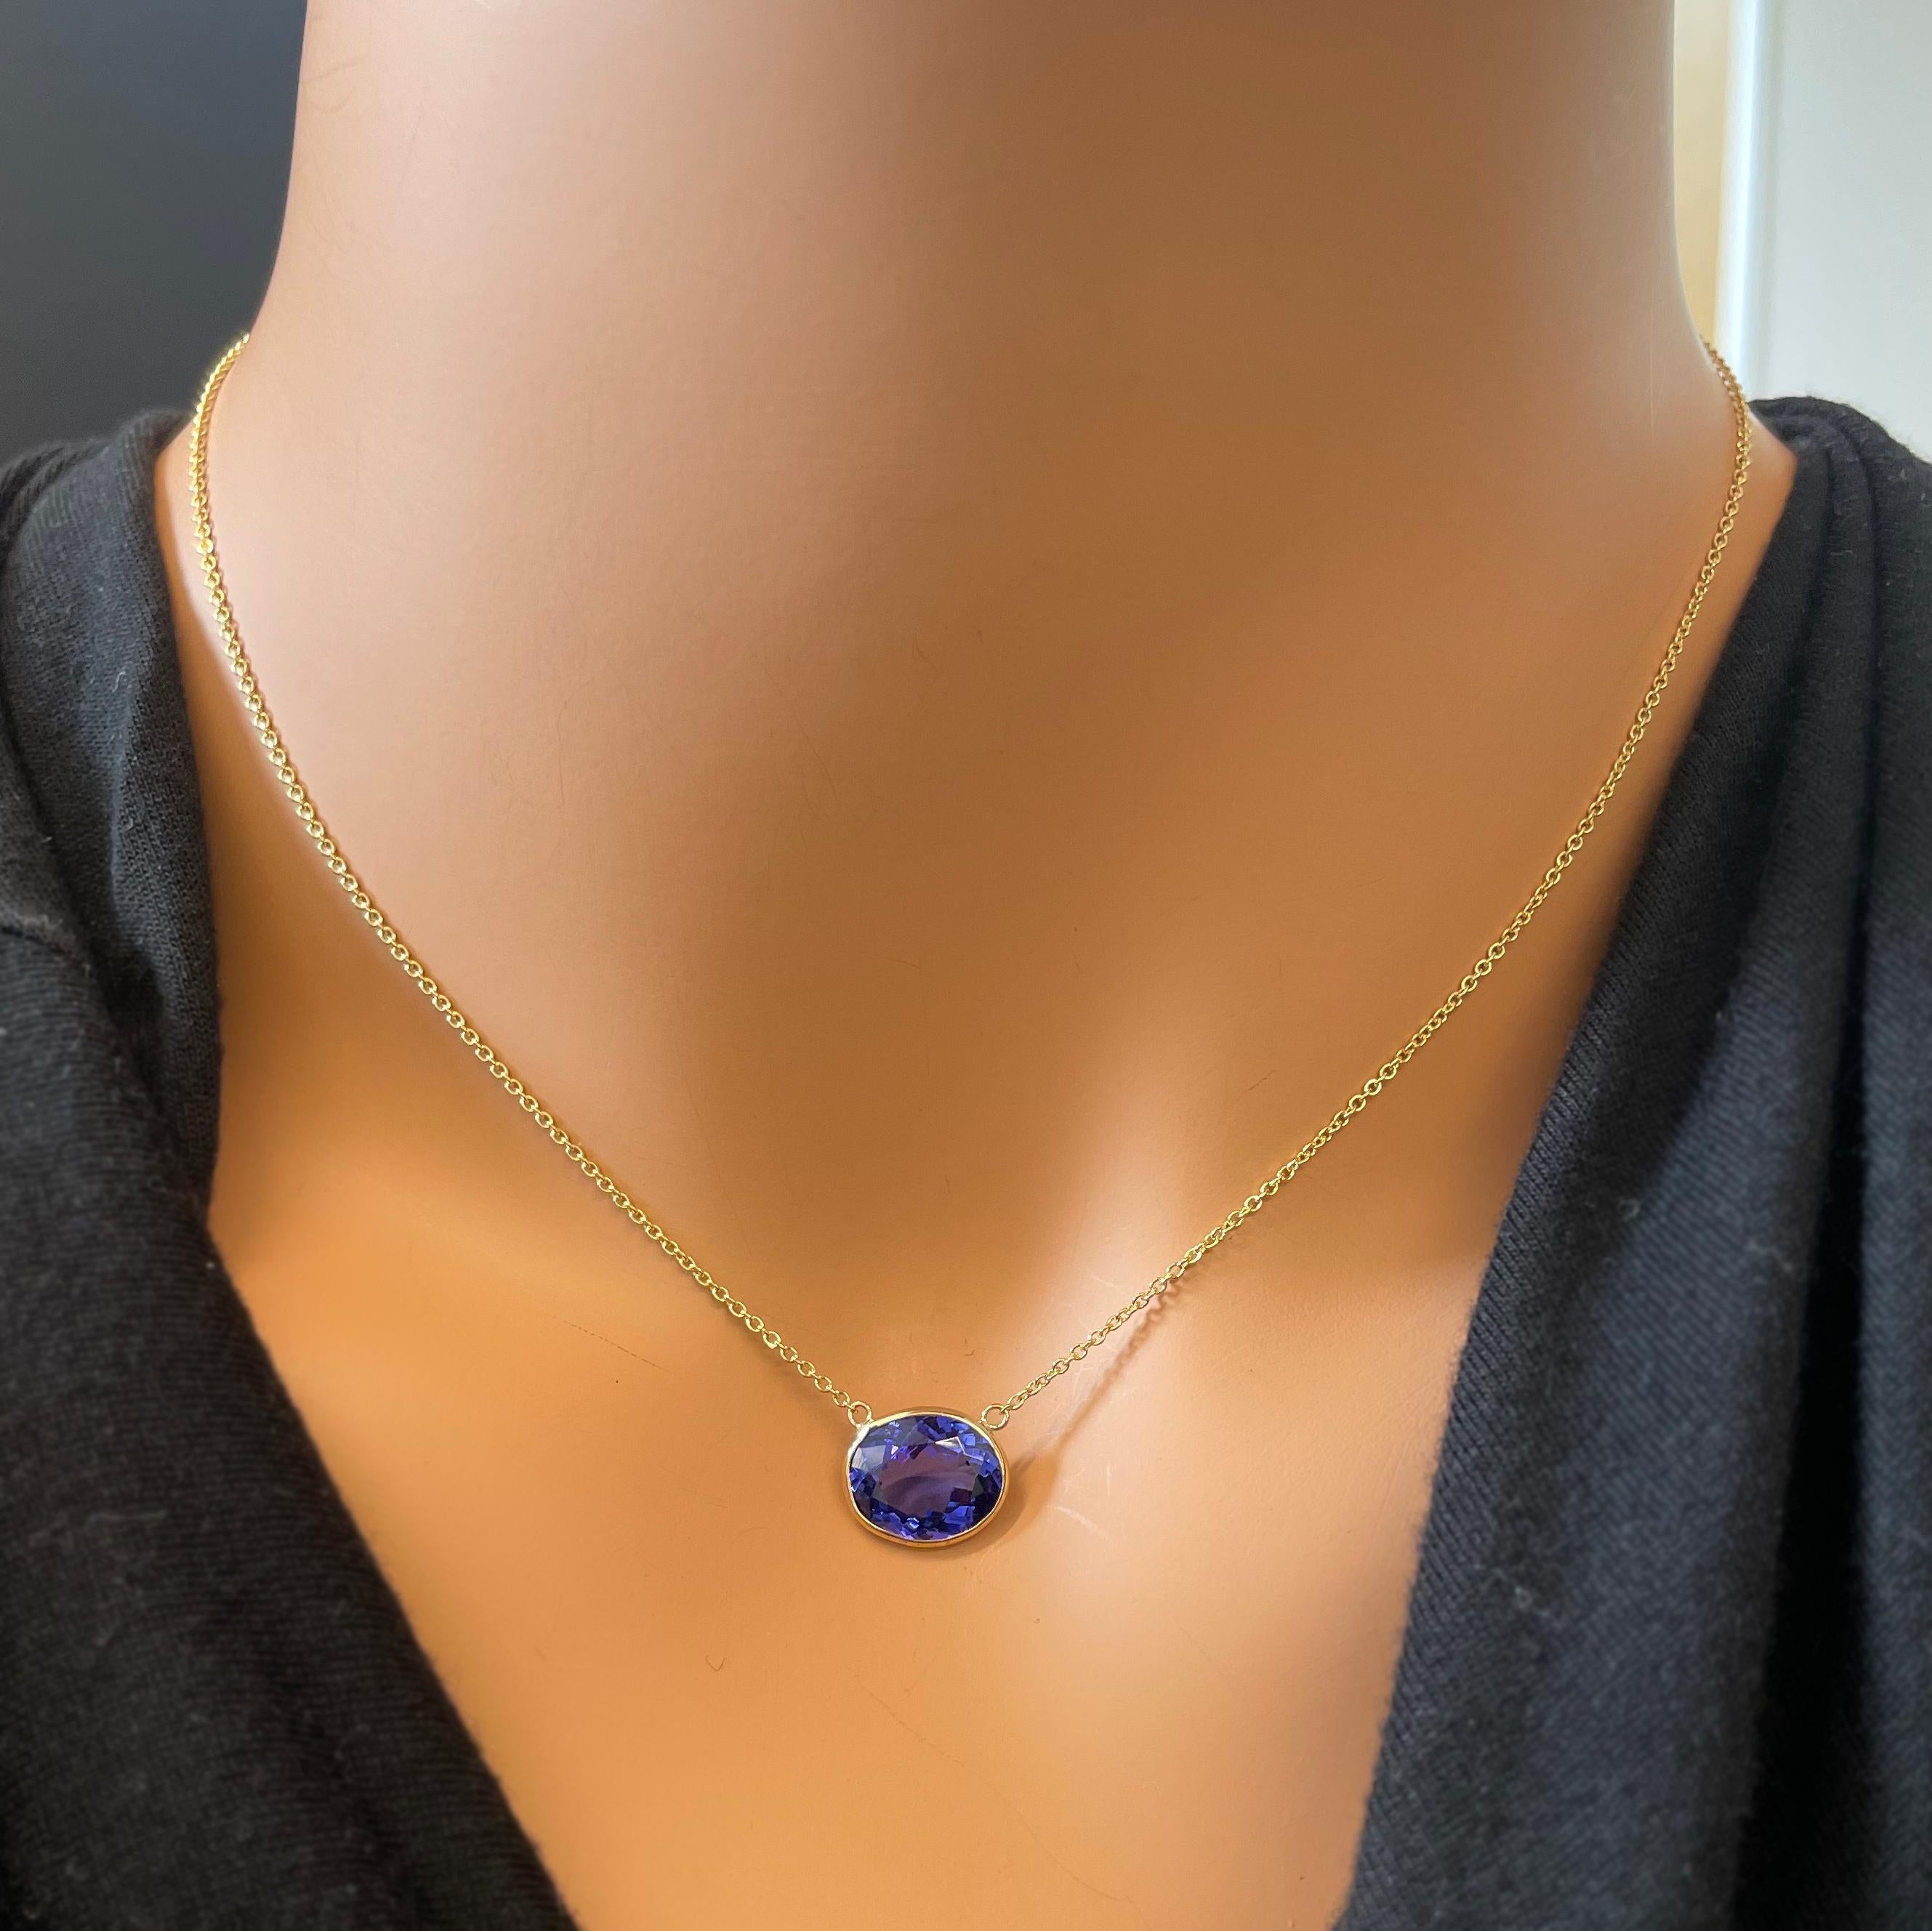 Oval Cut 4.13 Carat Oval Blue Tanzanite Fashion Necklaces In 14k Yellow Gold  For Sale